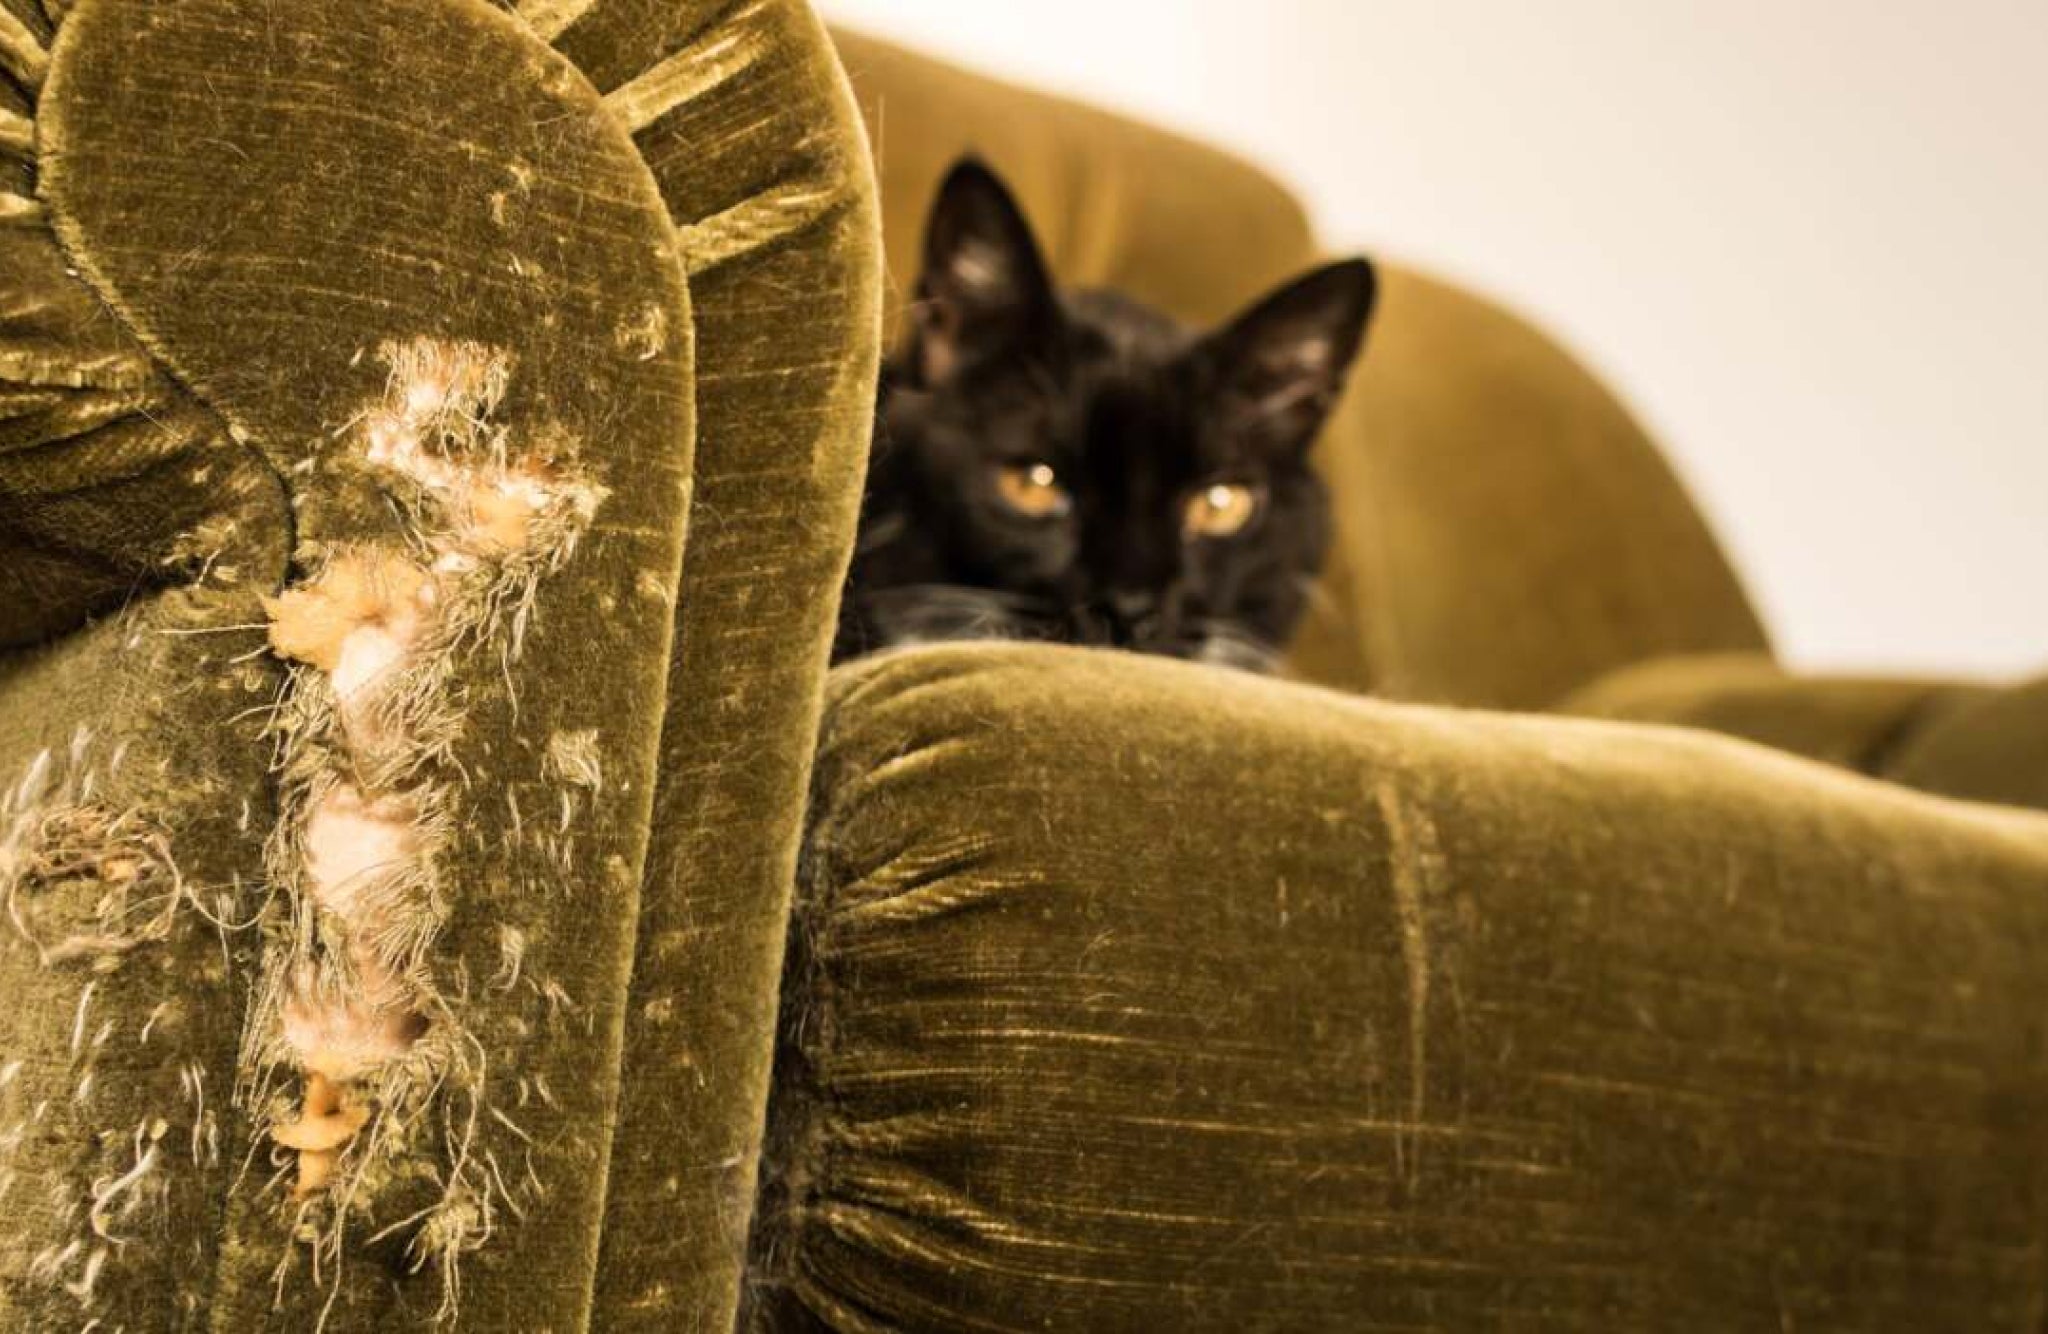  Best Sofa Fabric for Cats